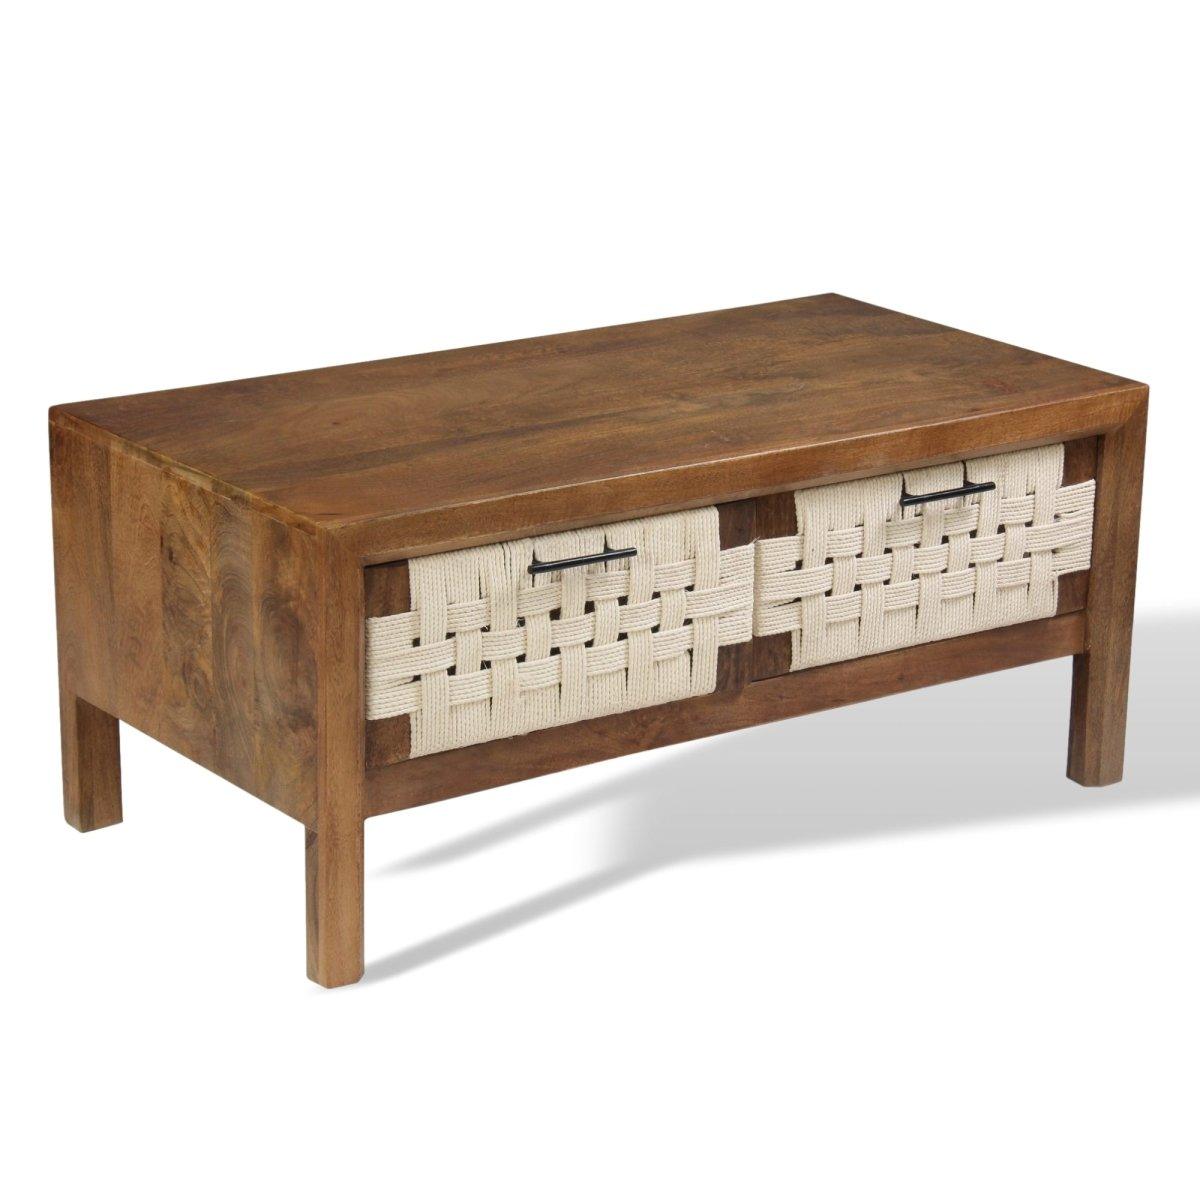 Butler Choco Mango Wood Coffee Table - Rustic Furniture Outlet